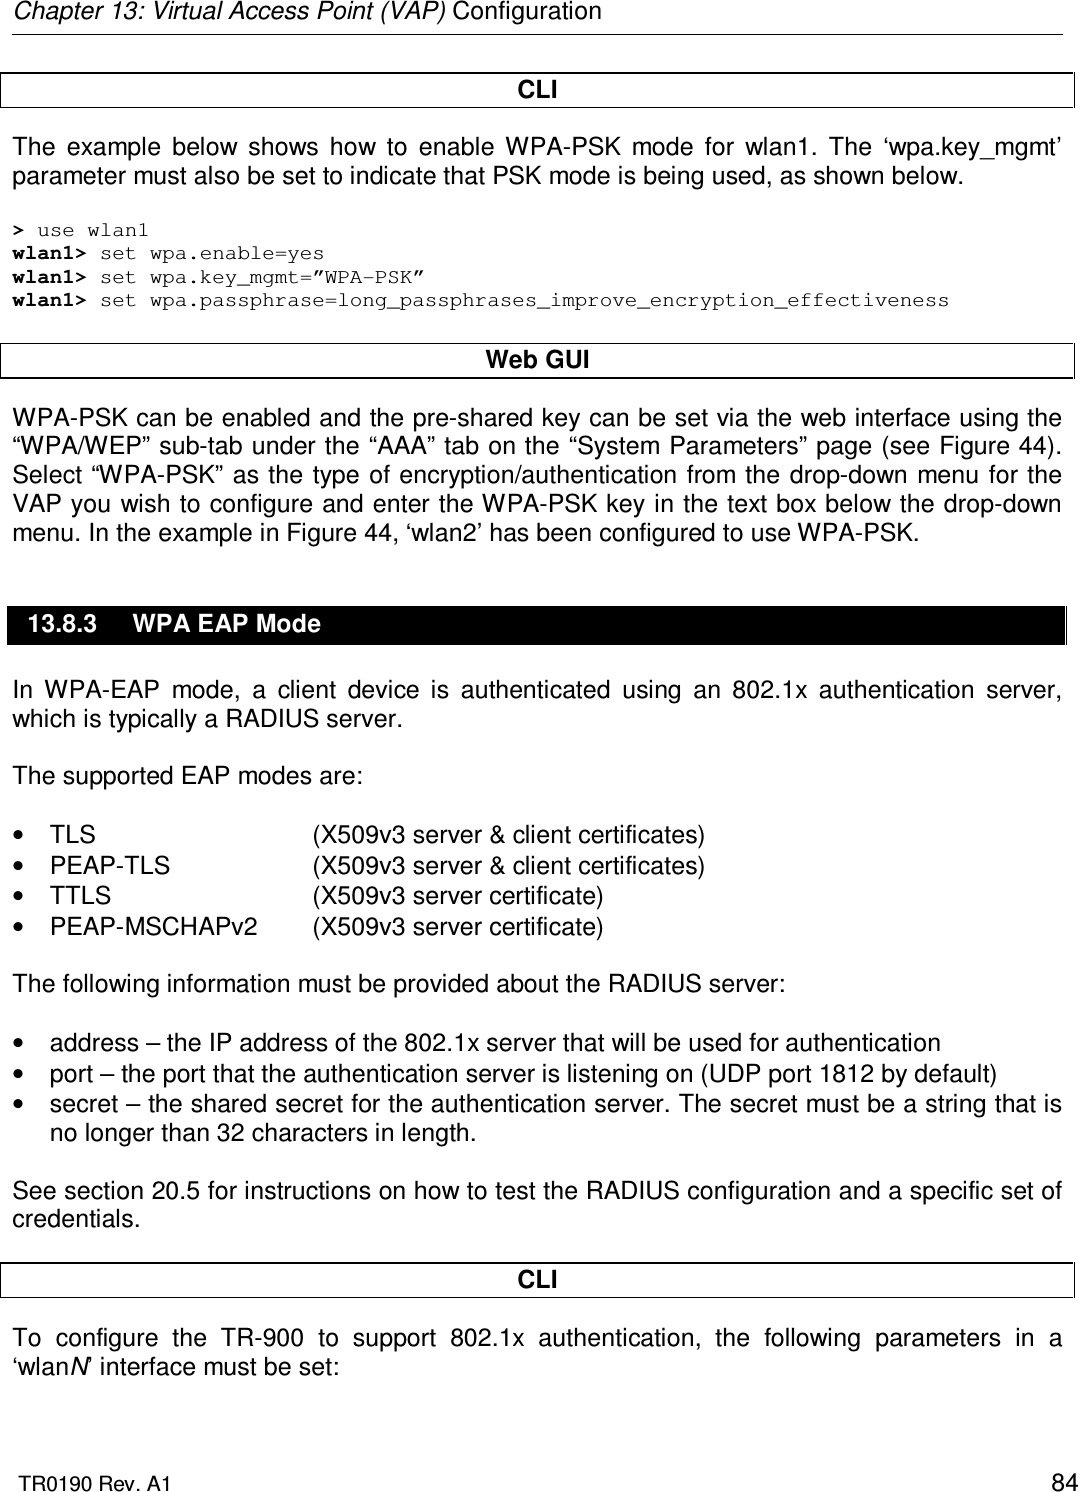 Chapter 13: Virtual Access Point (VAP) Configuration  TR0190 Rev. A1    84 CLI The  example  below  shows  how  to  enable  WPA-PSK  mode  for  wlan1.  The  ‘wpa.key_mgmt’ parameter must also be set to indicate that PSK mode is being used, as shown below.  &gt; use wlan1 wlan1&gt; set wpa.enable=yes wlan1&gt; set wpa.key_mgmt=”WPA-PSK” wlan1&gt; set wpa.passphrase=long_passphrases_improve_encryption_effectiveness  Web GUI WPA-PSK can be enabled and the pre-shared key can be set via the web interface using the “WPA/WEP” sub-tab under the “AAA” tab on the “System Parameters” page (see Figure 44). Select “WPA-PSK” as the type of encryption/authentication from  the drop-down menu for the VAP you wish to configure and enter the WPA-PSK key in the text box below the drop-down menu. In the example in Figure 44, ‘wlan2’ has been configured to use WPA-PSK. 13.8.3  WPA EAP Mode In  WPA-EAP  mode,  a  client  device  is  authenticated  using  an  802.1x  authentication  server, which is typically a RADIUS server.   The supported EAP modes are:  •  TLS      (X509v3 server &amp; client certificates) •  PEAP-TLS    (X509v3 server &amp; client certificates) •  TTLS      (X509v3 server certificate) •  PEAP-MSCHAPv2  (X509v3 server certificate)  The following information must be provided about the RADIUS server:  •  address – the IP address of the 802.1x server that will be used for authentication •  port – the port that the authentication server is listening on (UDP port 1812 by default) •  secret – the shared secret for the authentication server. The secret must be a string that is no longer than 32 characters in length.  See section 20.5 for instructions on how to test the RADIUS configuration and a specific set of credentials.  CLI To  configure  the  TR-900  to  support  802.1x  authentication,  the  following  parameters  in  a ‘wlanN’ interface must be set:  